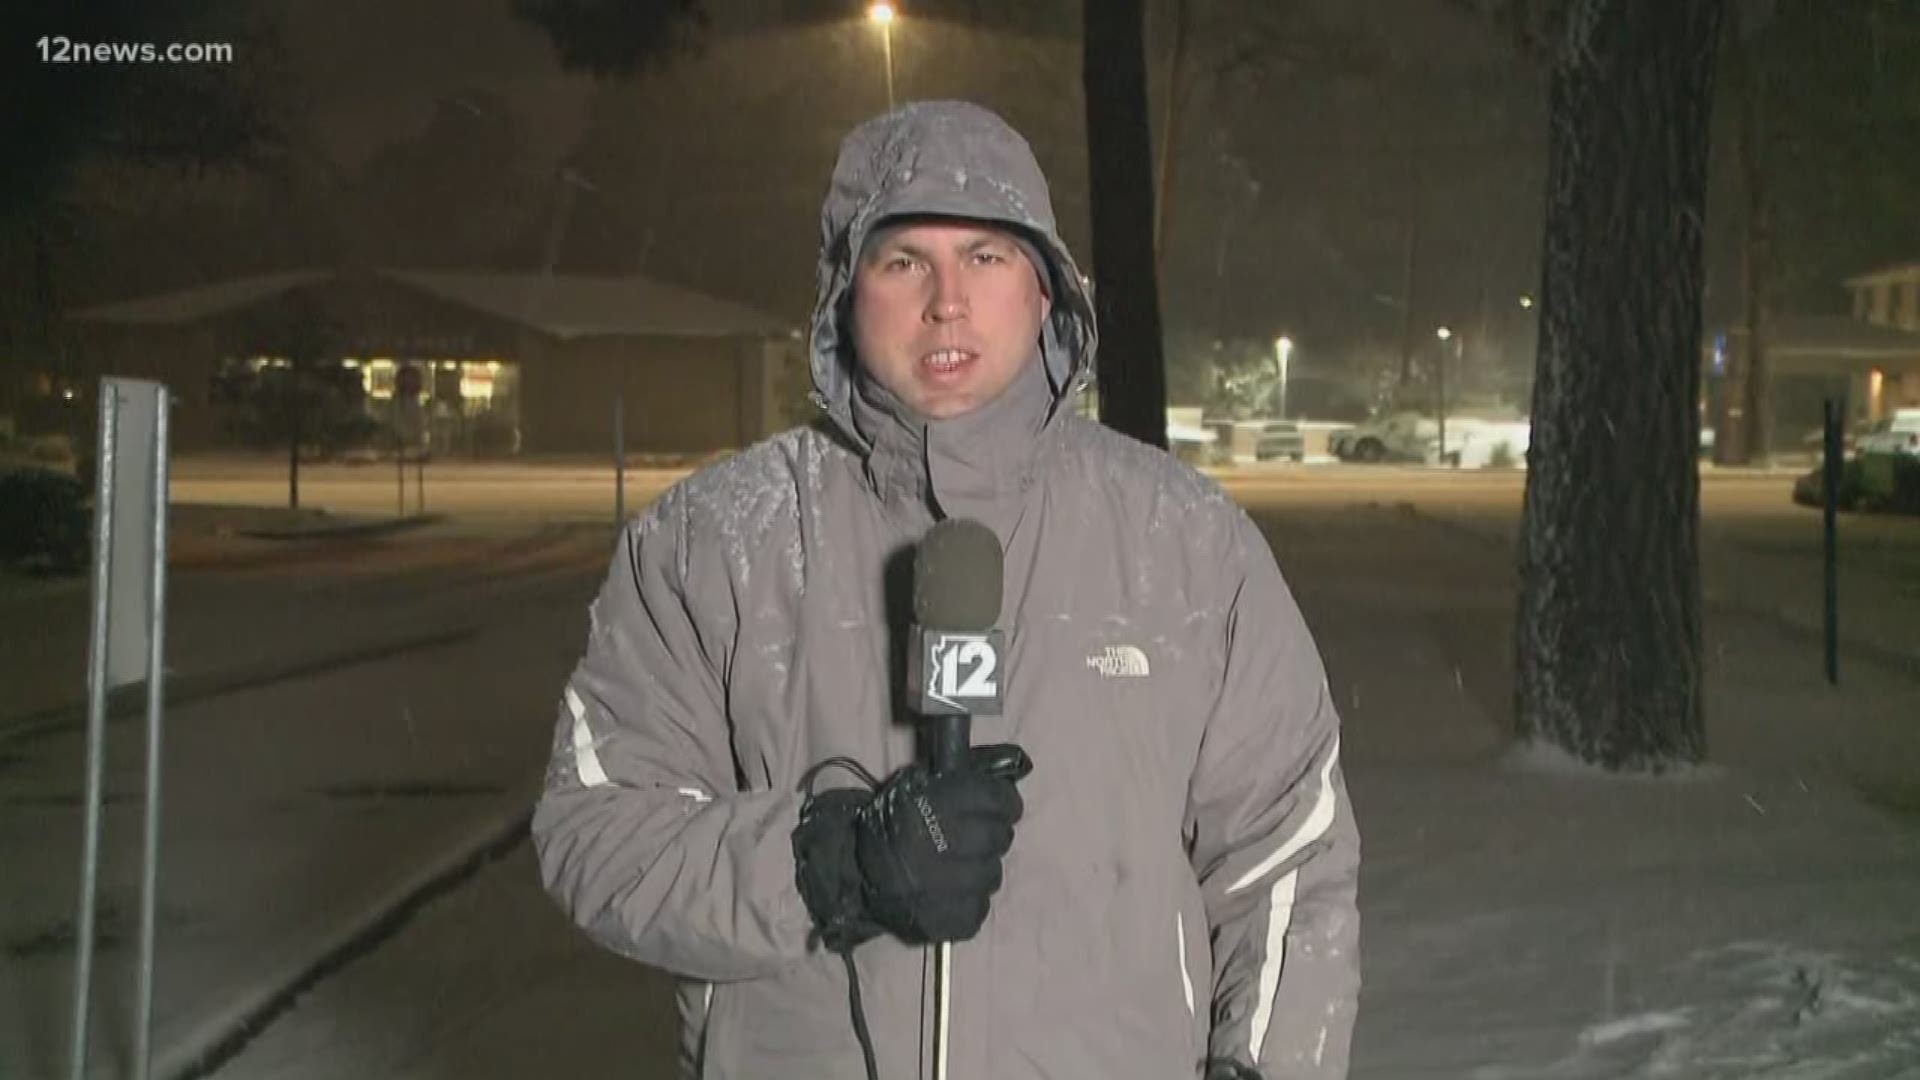 Will Pitts gives us the current conditions of the snowfall in the Payson area Thursday morning.